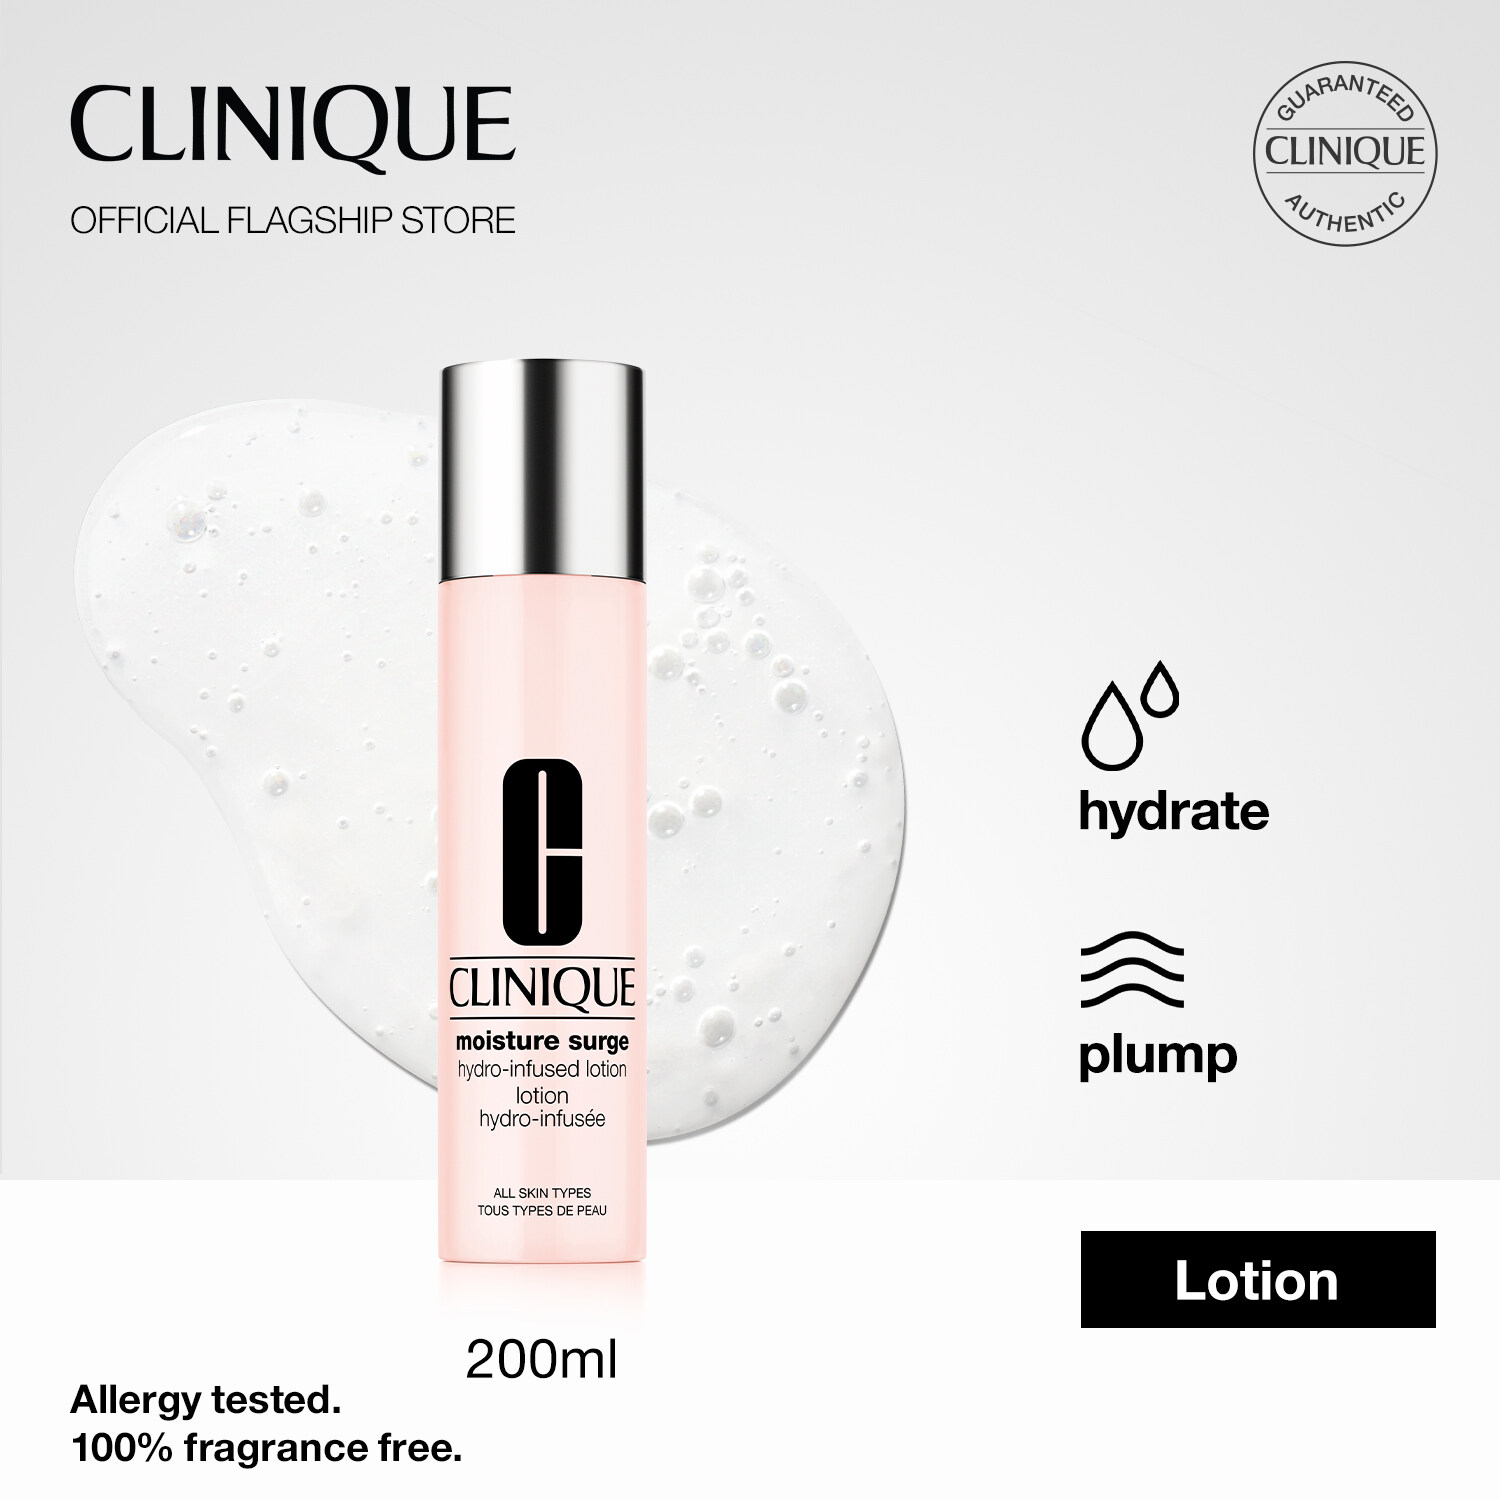 Clinique Moisture Surge Hydro-Infused Lotion - Lotion 200ml